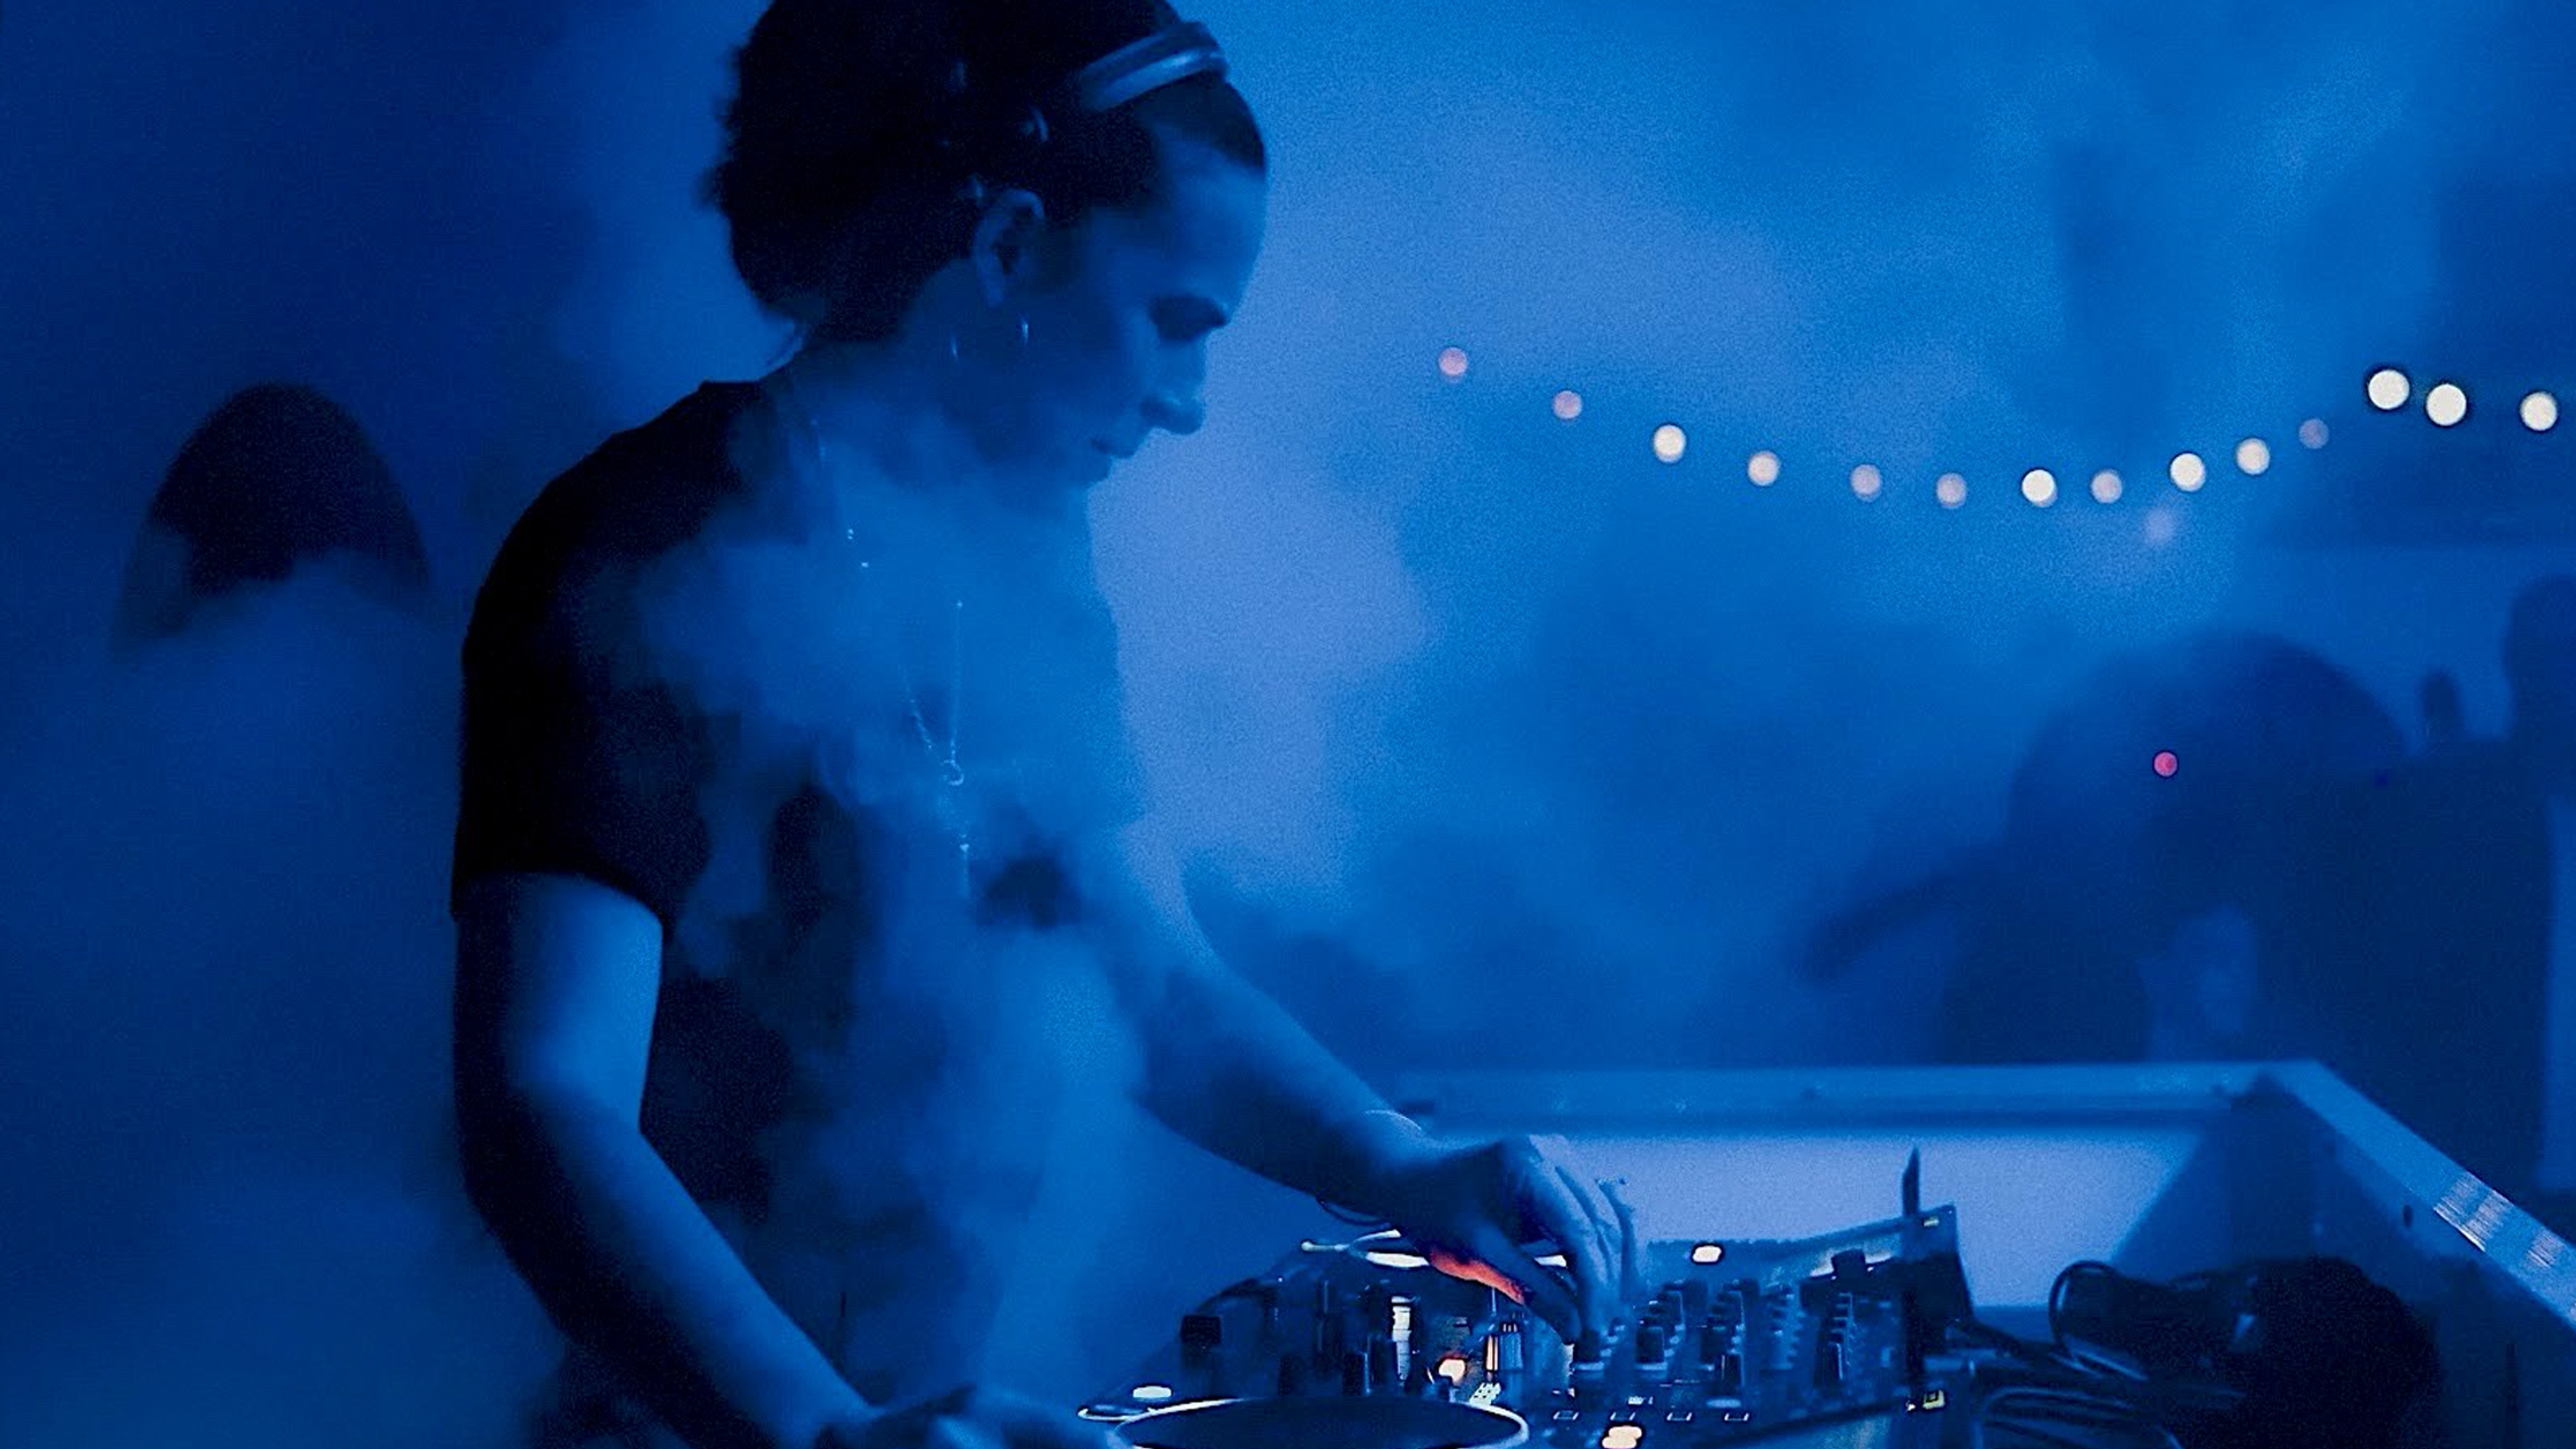 JNETT performing at an outdoor festival engulfed in smoke from a smoke machine